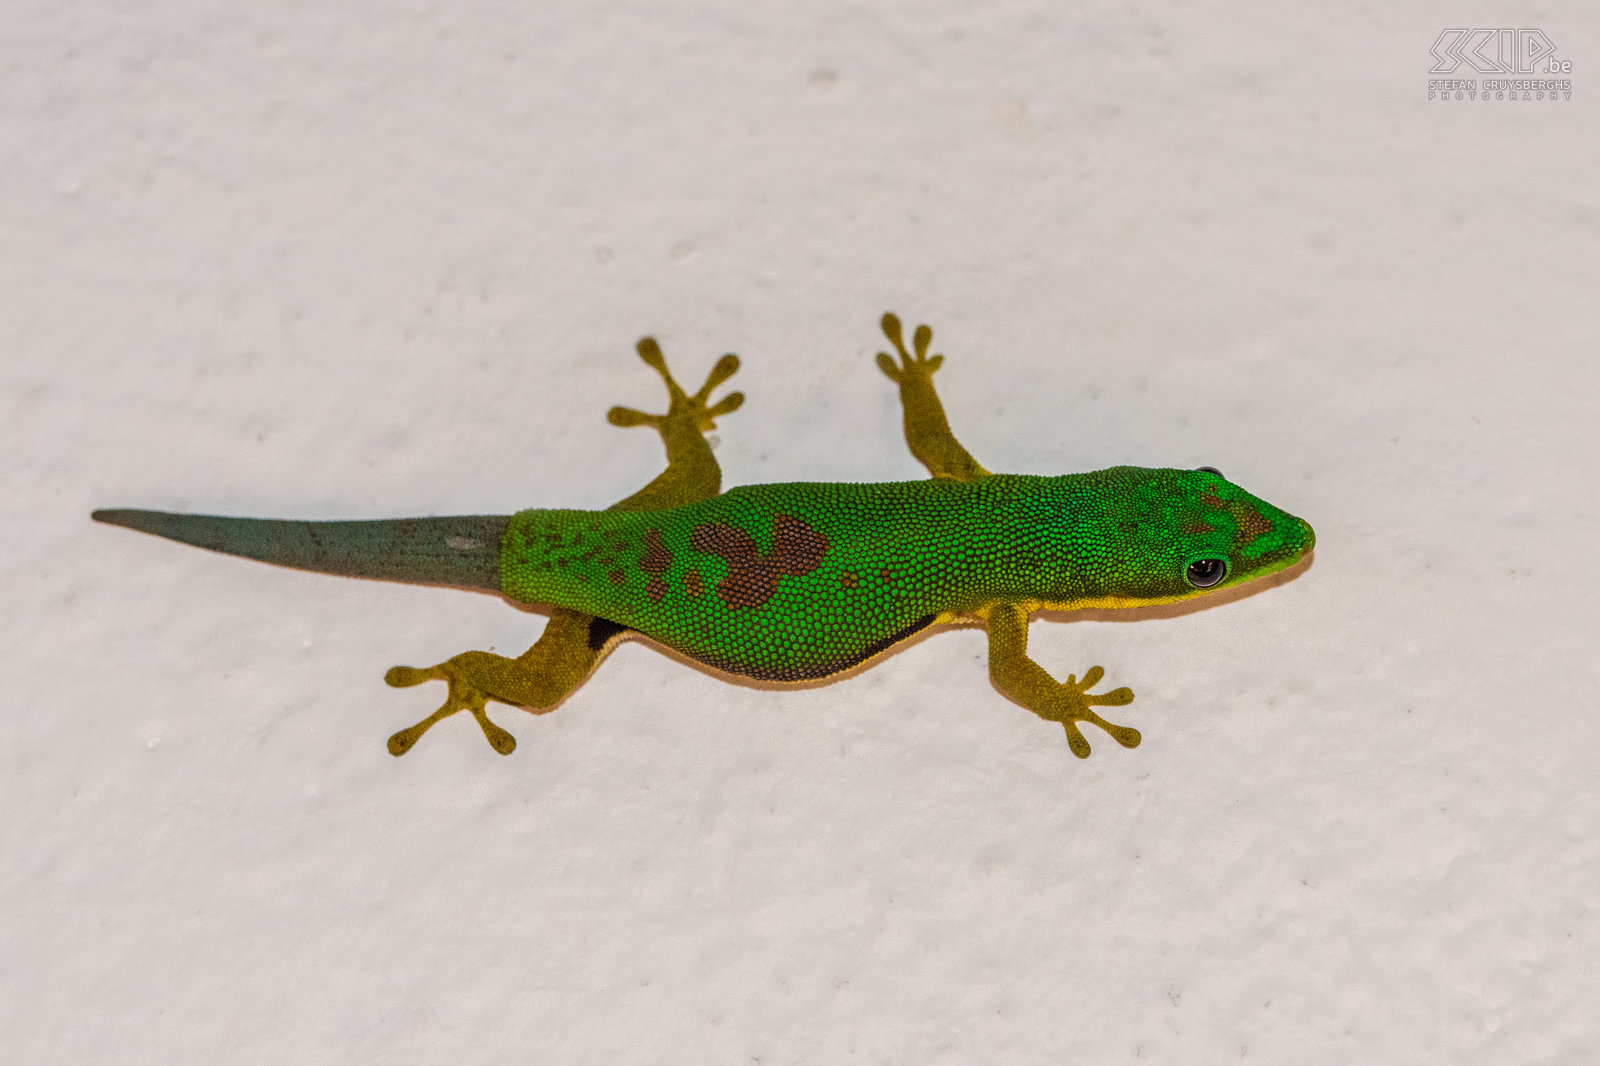 Ranomafana - Lined day gecko The common and colourful lined day gecko (Phelsuma lineata). Stefan Cruysberghs